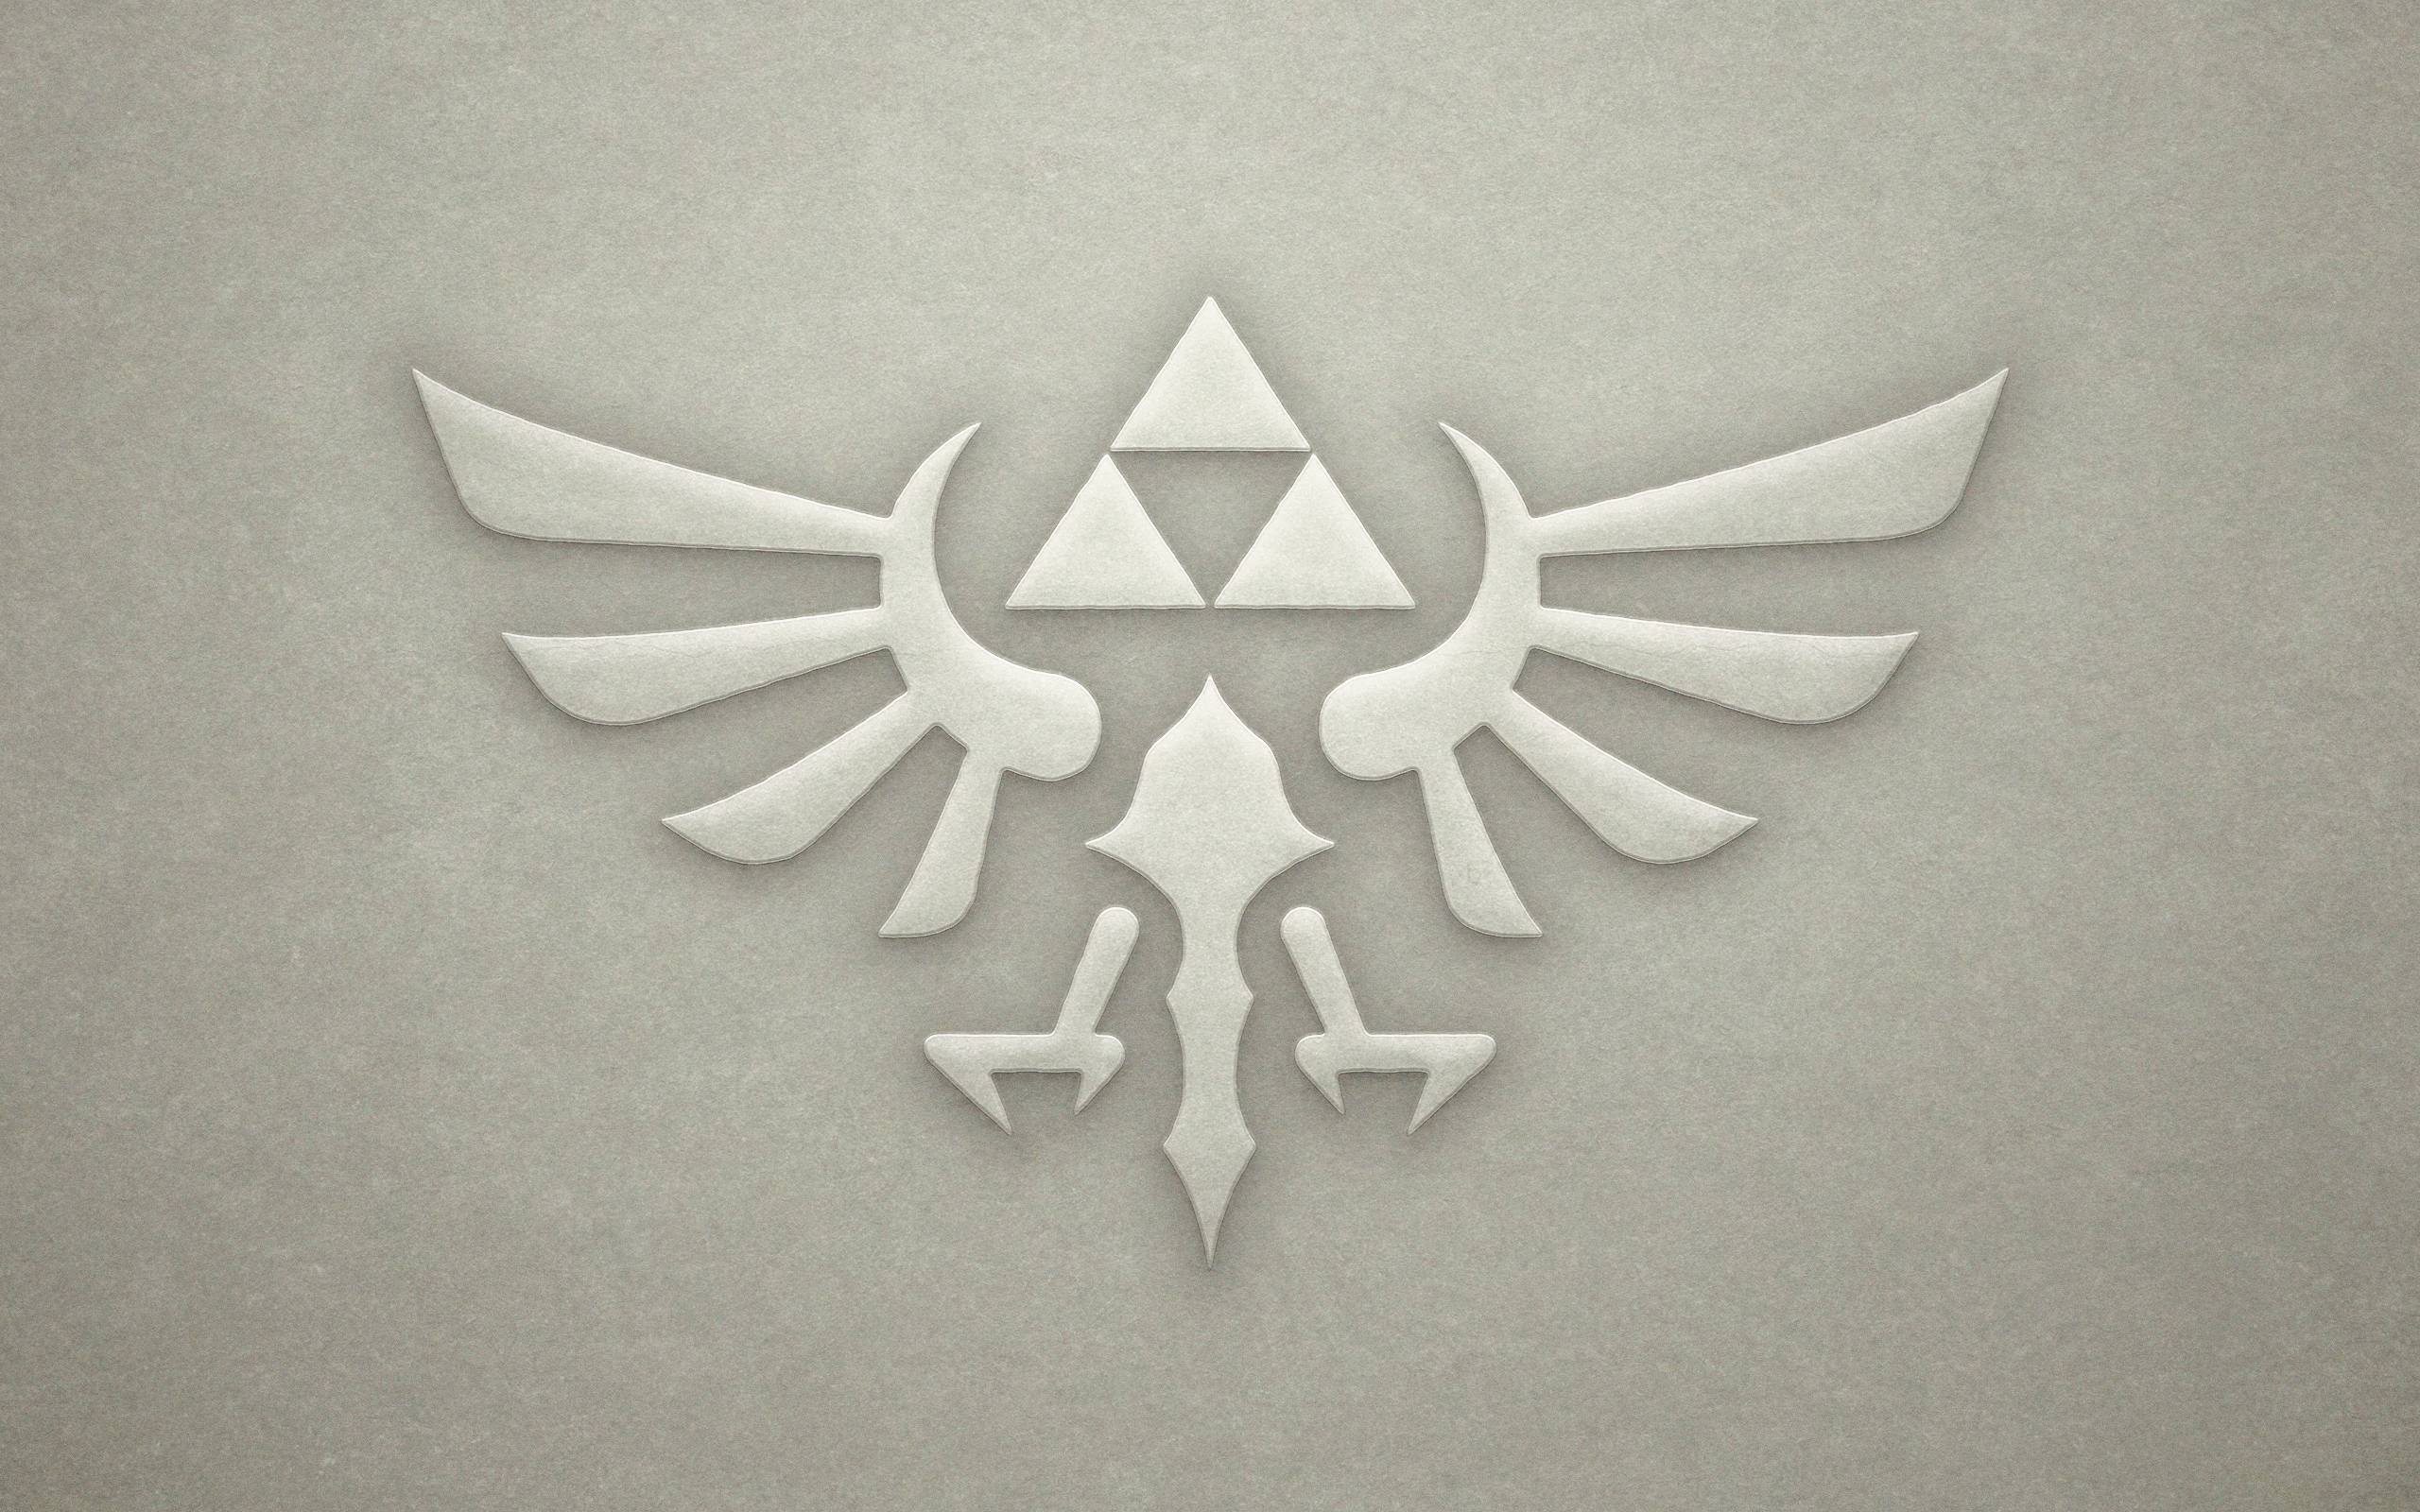 Found an awesome Hyrule Crest wallpaper!